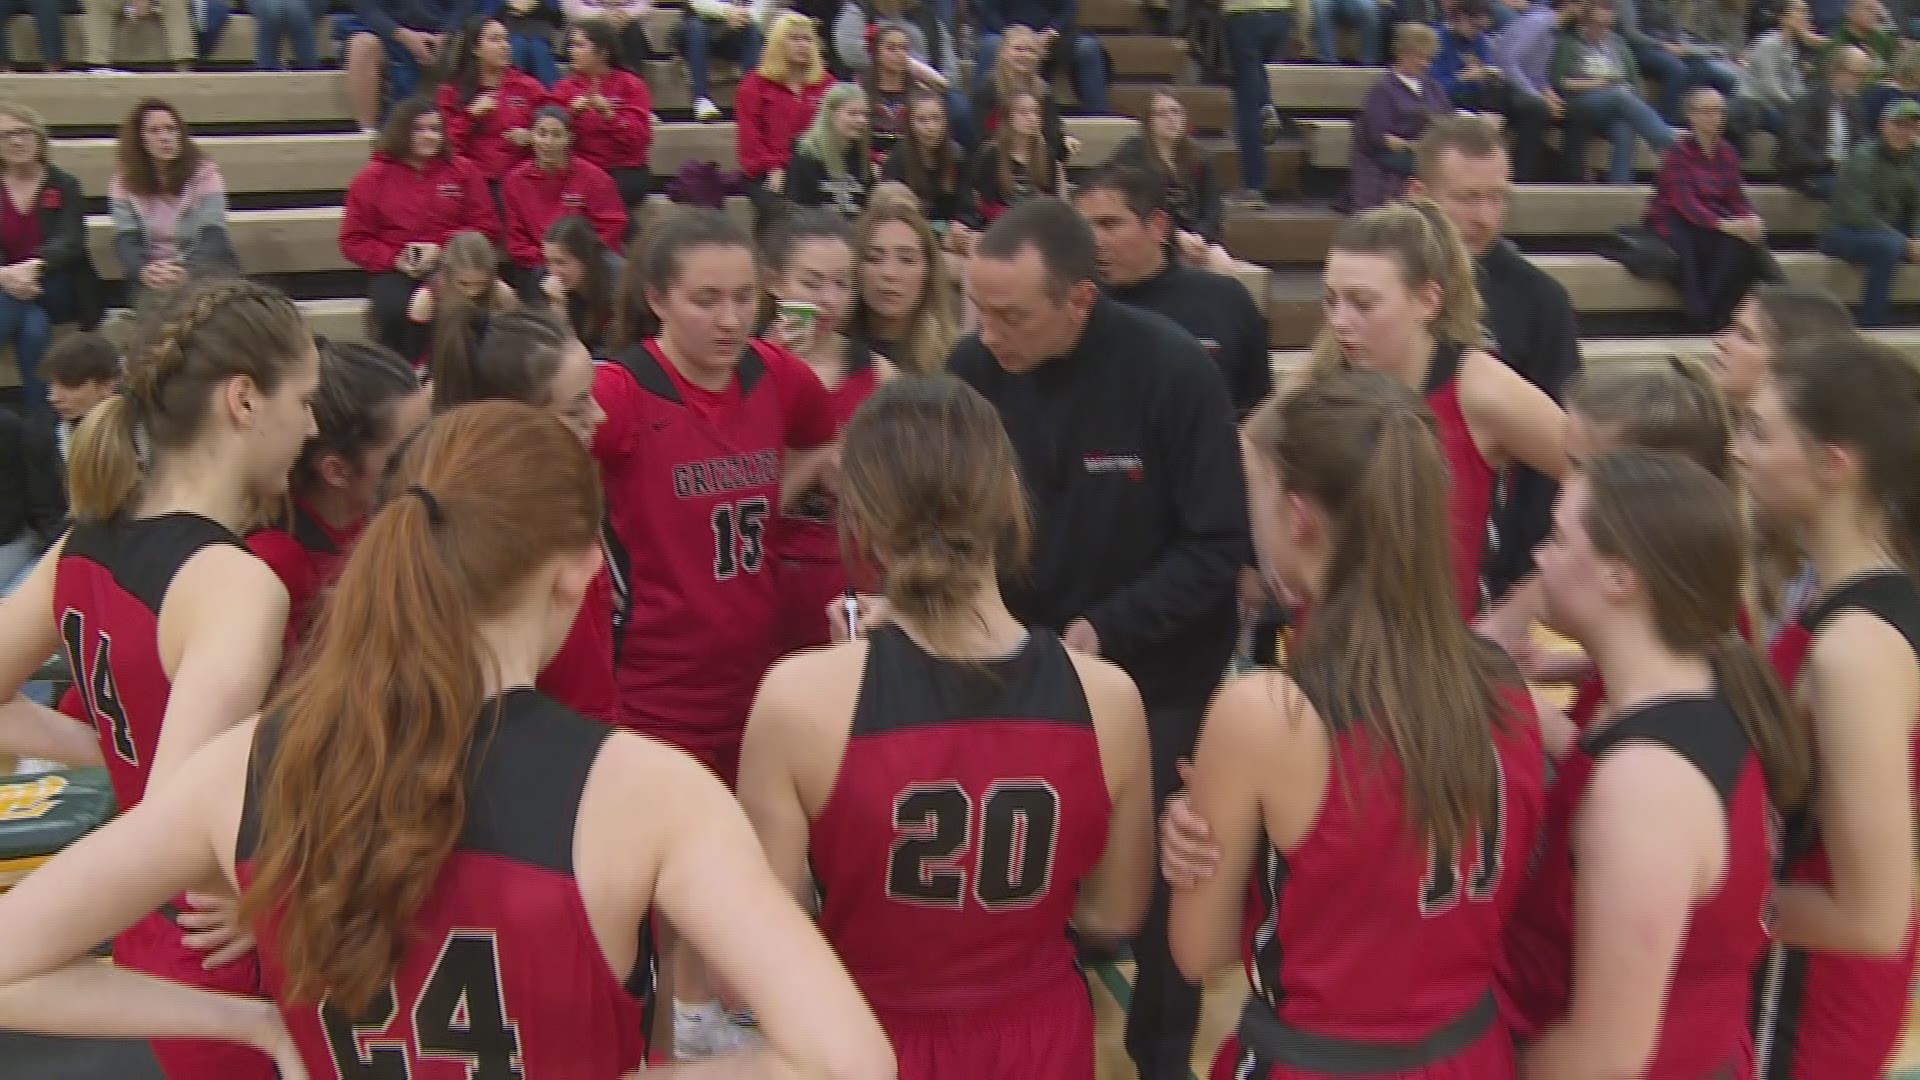 Highlights of McMinnville's 57-53 win over West Linn in the second round of the playoffs. Highlights are part of KGW's Friday's Night Hoops with Orlando Sanchez.